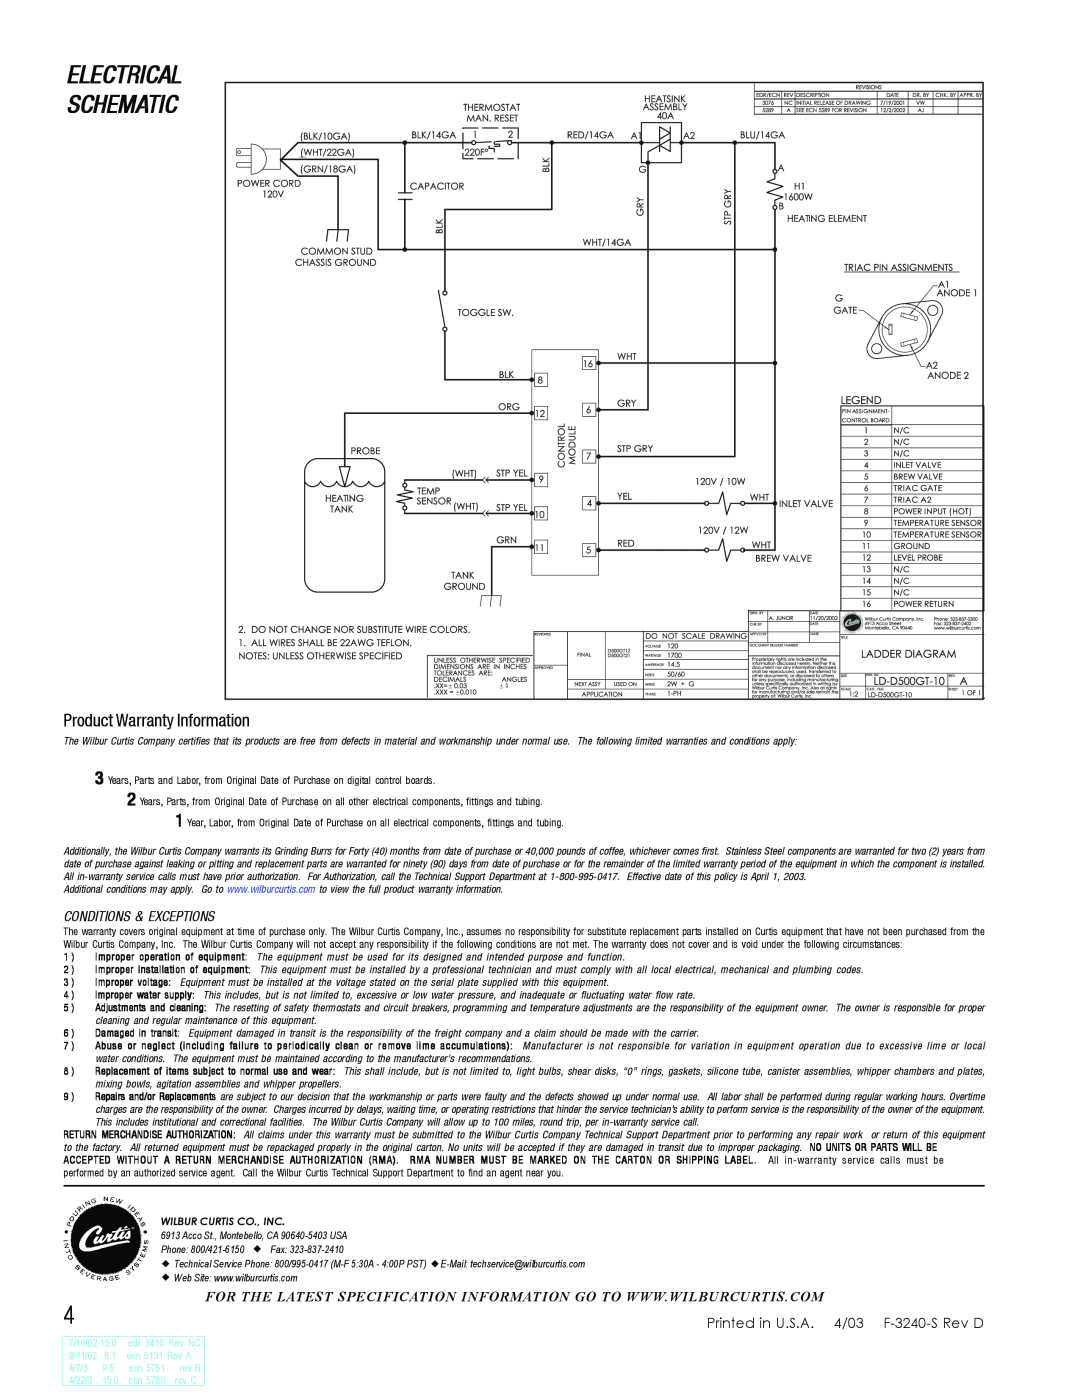 Wibur Curtis Company D500GT Product Warranty Information, Printed in U.S.A. 4/03 F-3240-S Rev D, Electrical, Schematic 